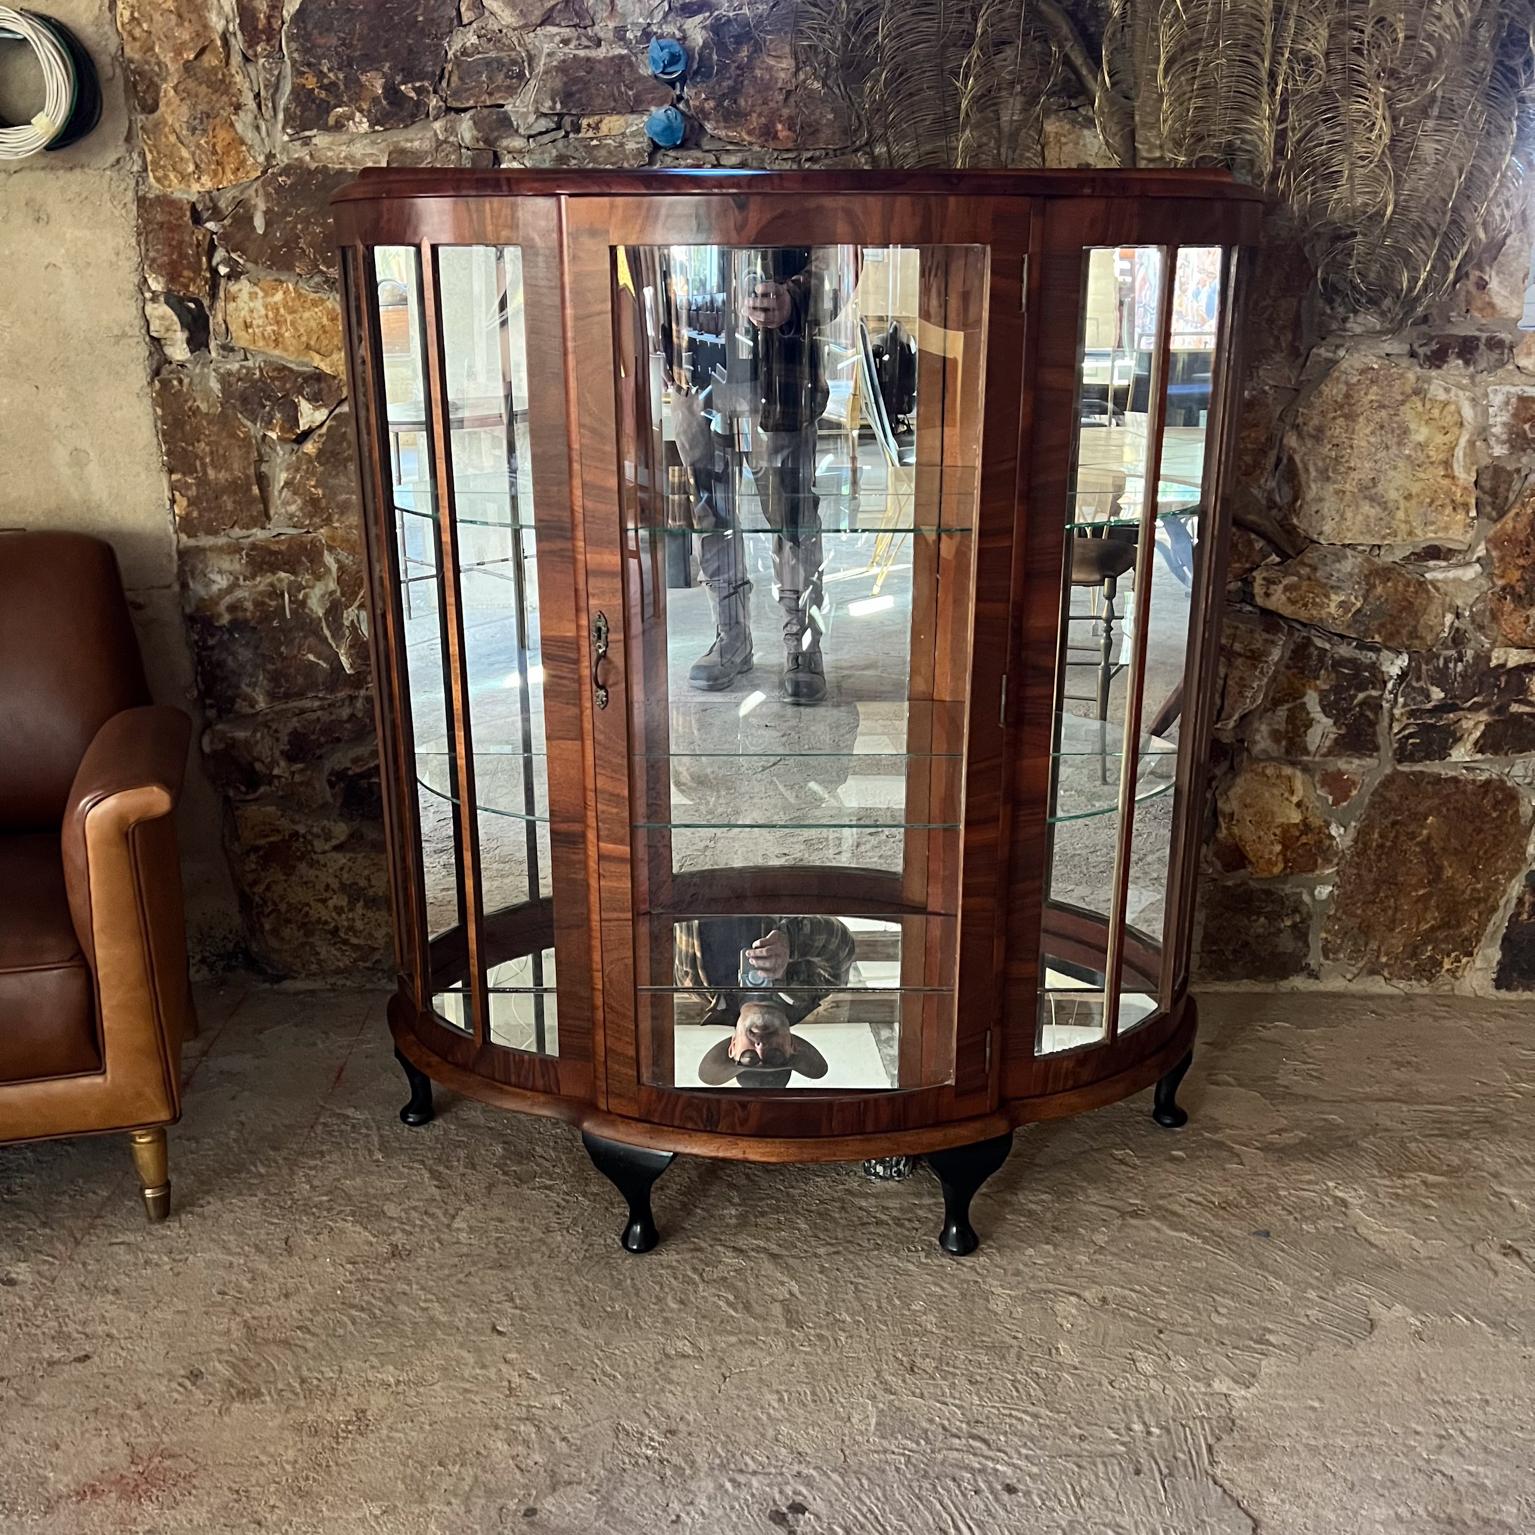 1900s Art Deco Curio Display Vitrine Cabinet Exotic Wood
No label
Cariole legs, Curved demilune Glass, Exotic Walnut Rosewood
New glass shelves retrofitted back mirror panel.
Wood has been restored. Glass in good shape.
Missing front lock key.
Firm